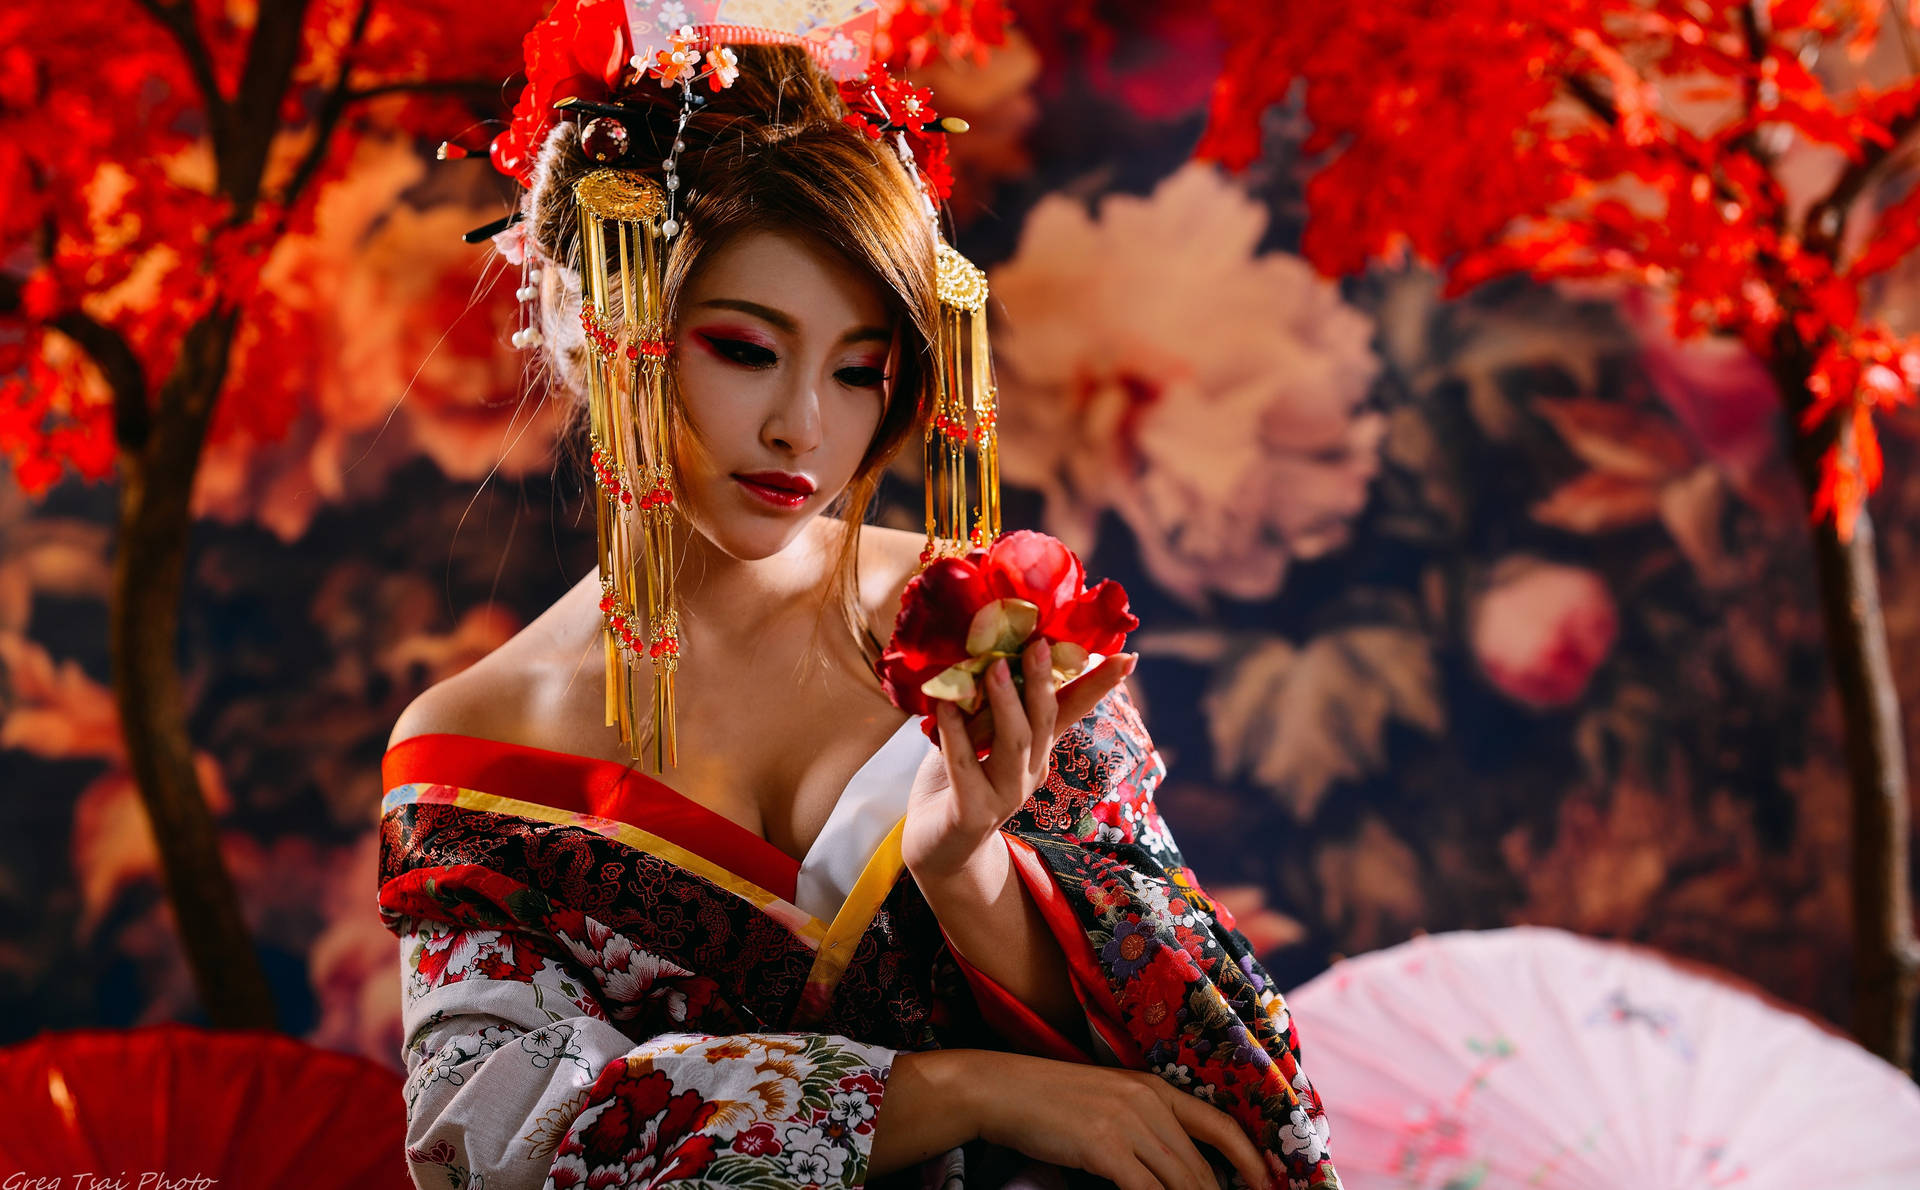 Cool Japanese Woman Background